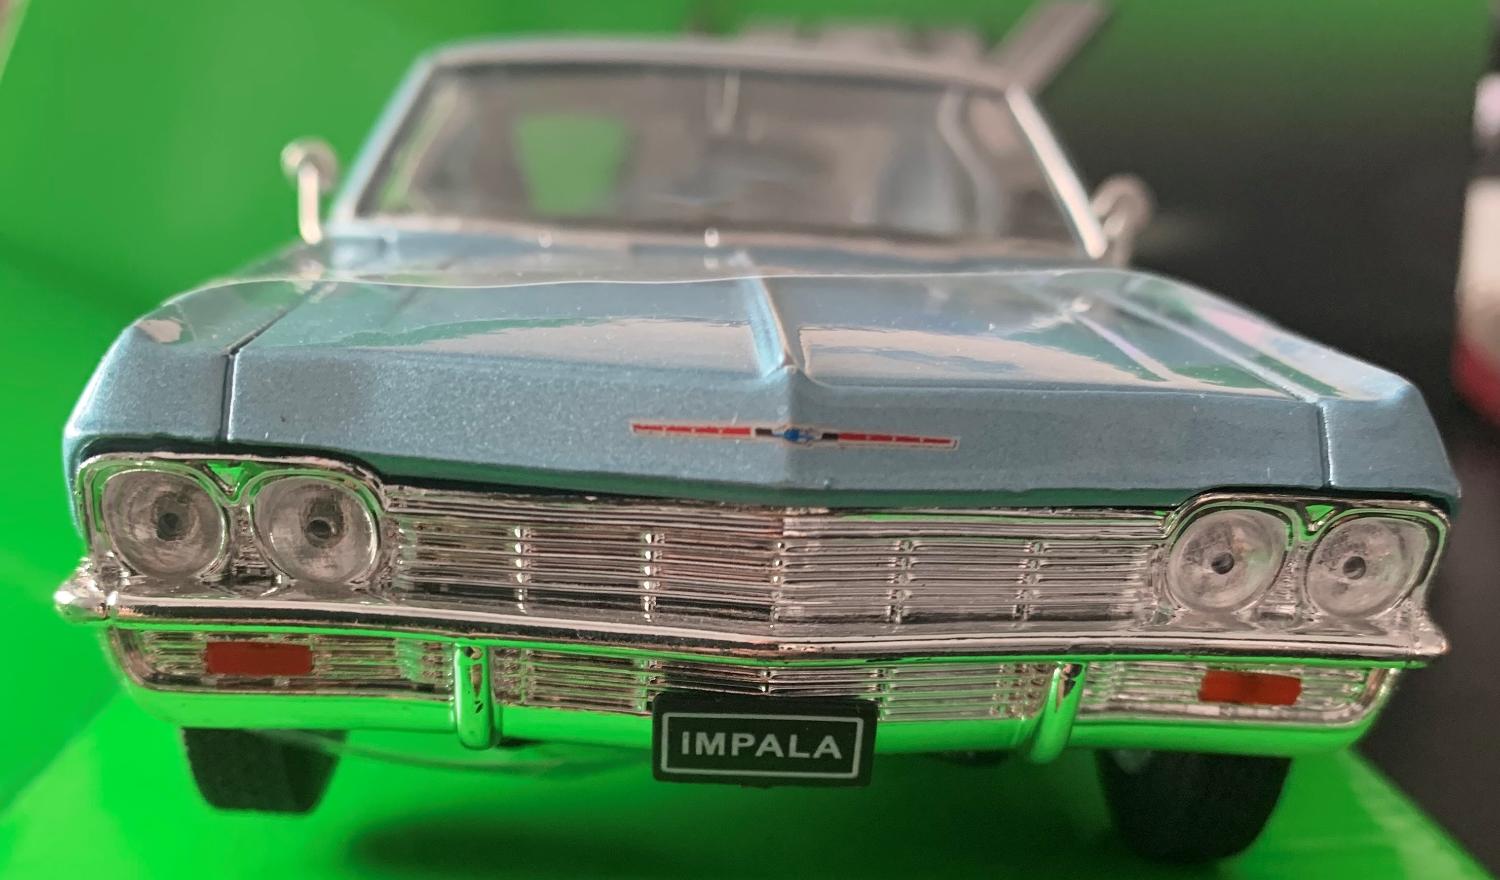 Chevrolet Impala SS 396 1965 in light blue 1:24 scale model from Welly